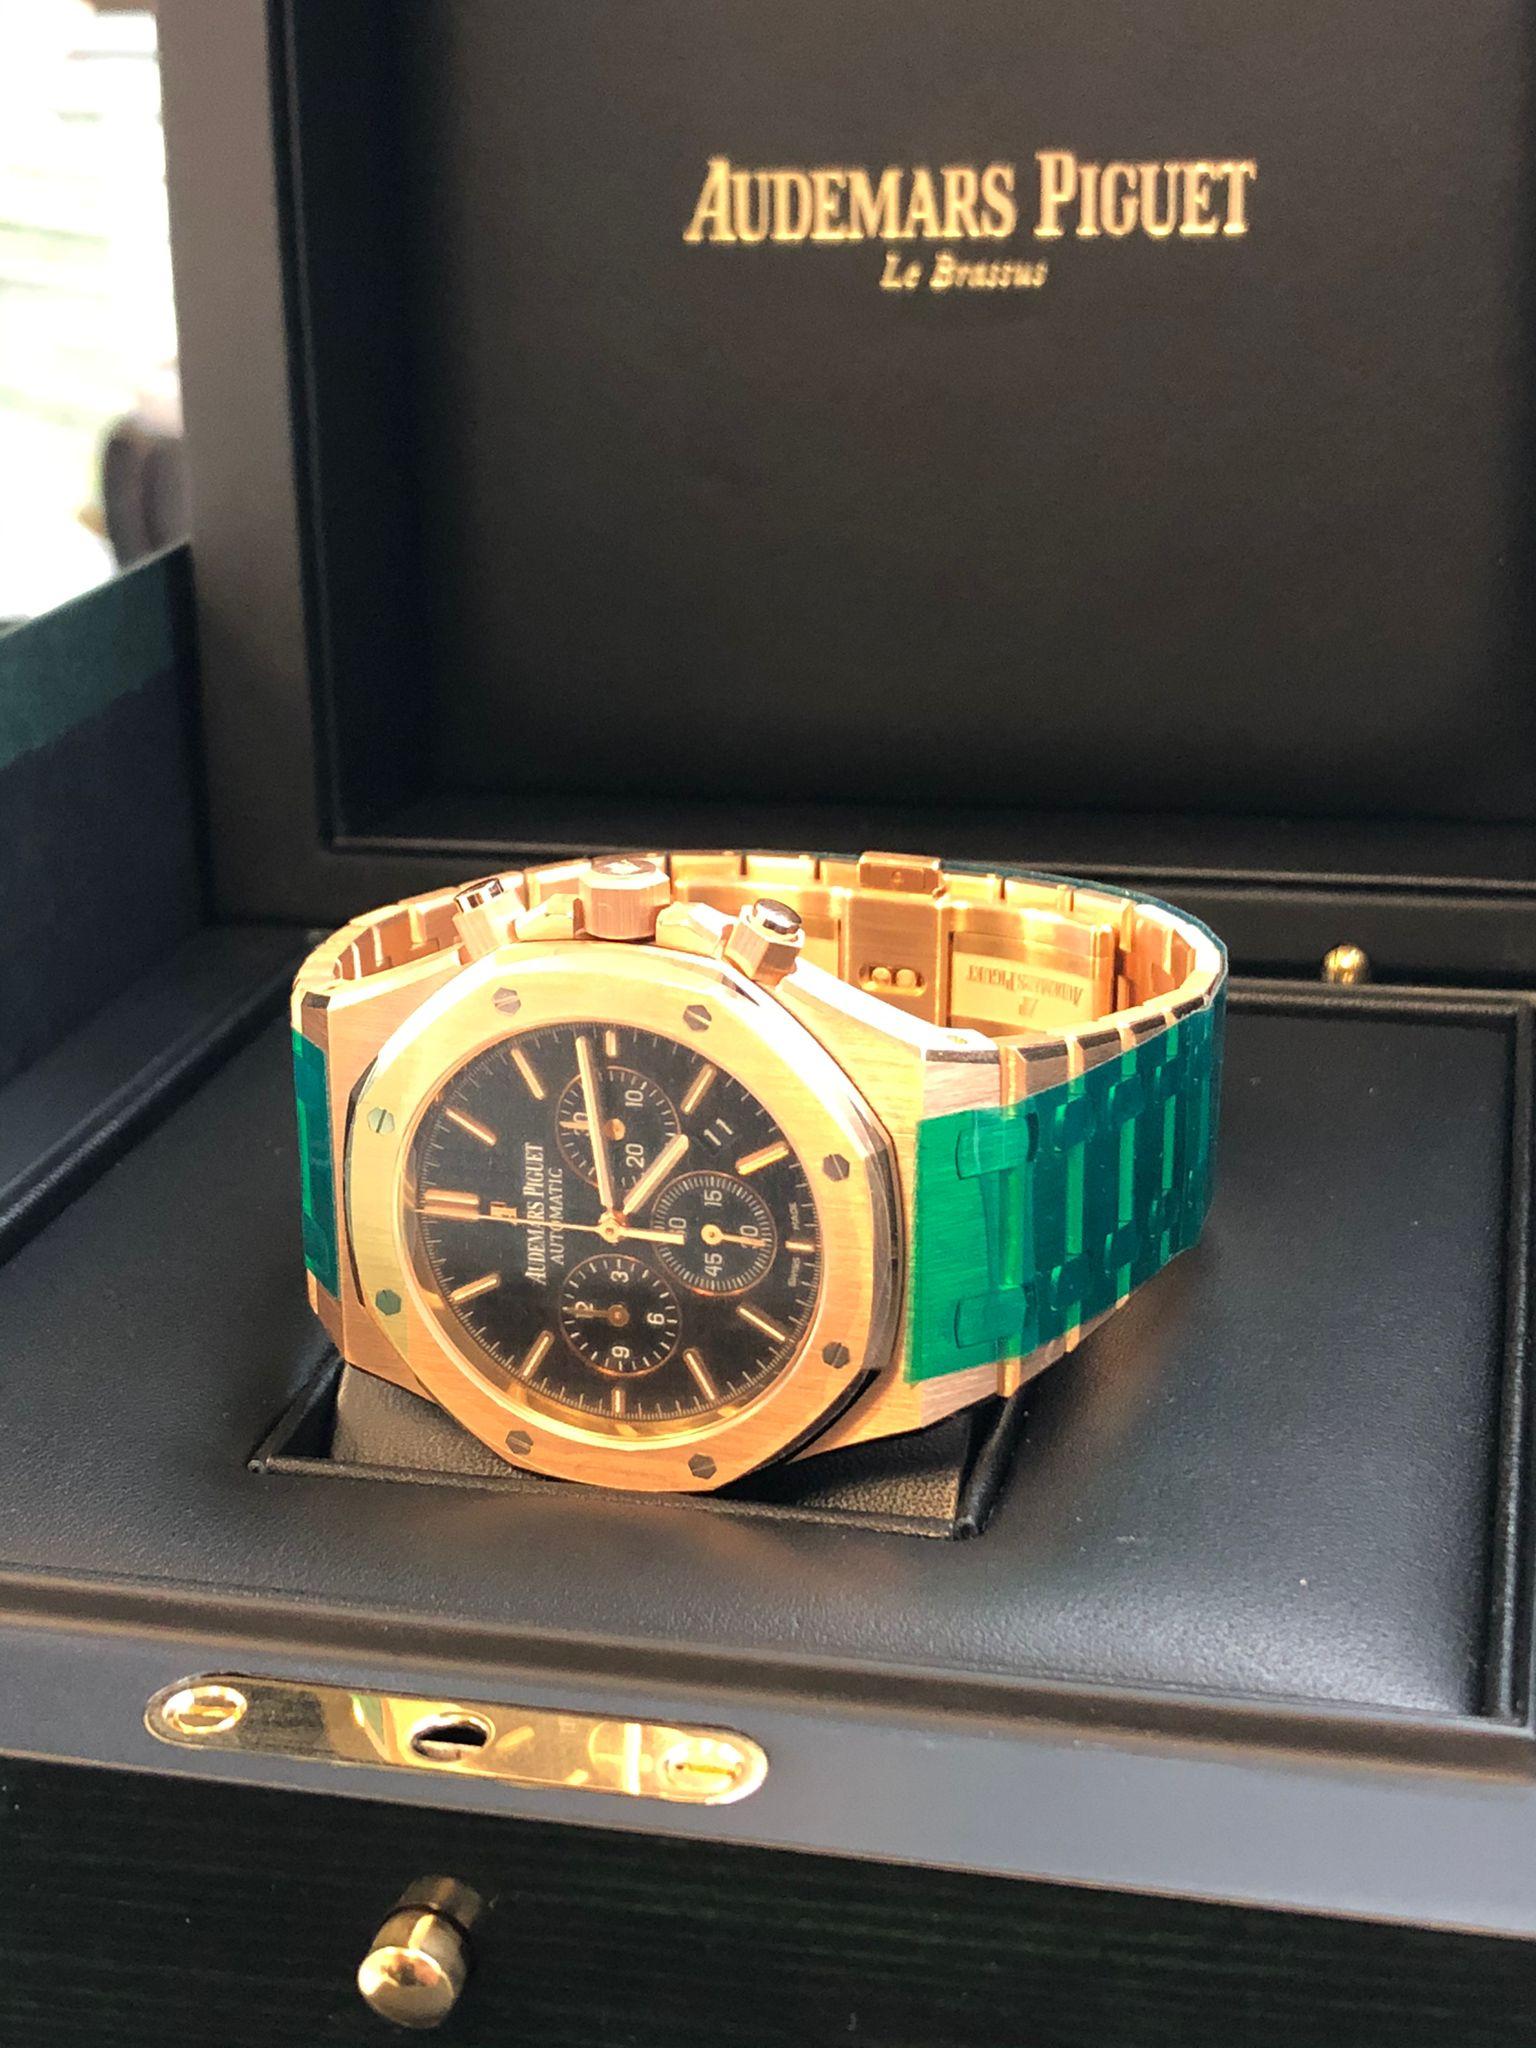 Audemars Piguet Royal Oak 18K Rose Gold Chronograph Watch 26320OROO1220OR01 In Excellent Condition For Sale In Aventura, FL